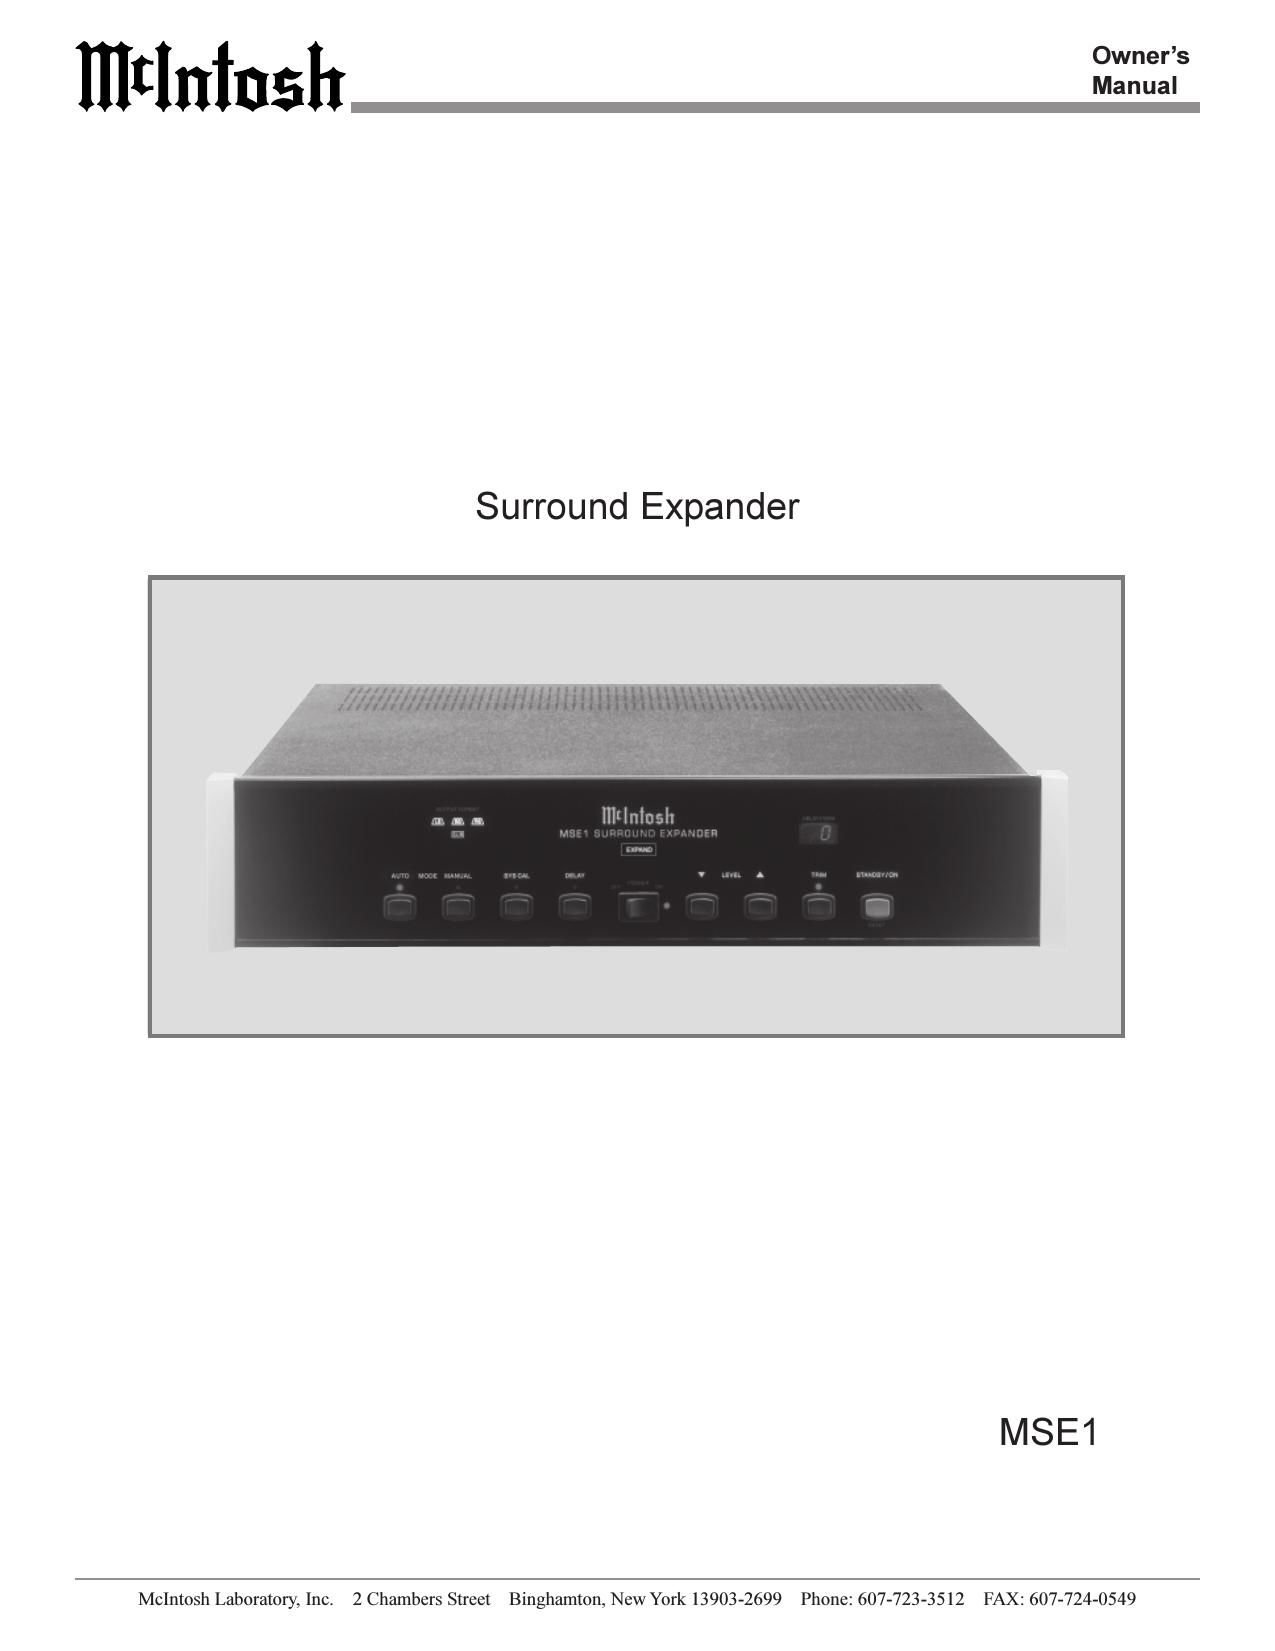 McIntosh MSE 1 Owners Manual